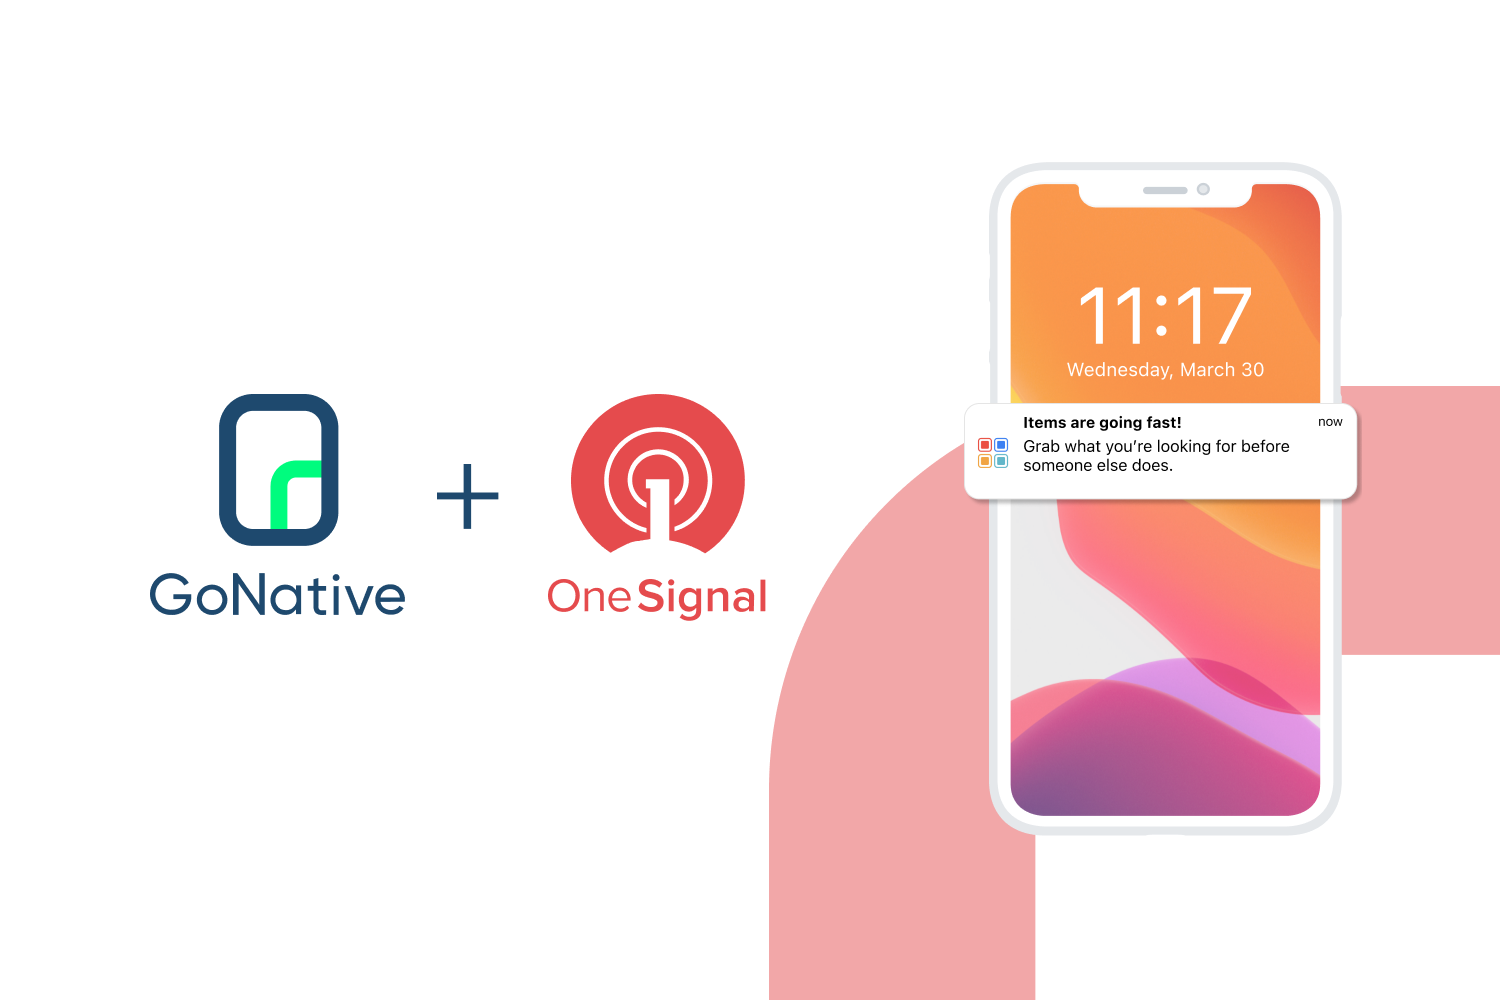 How to send your first push notification with OneSignal